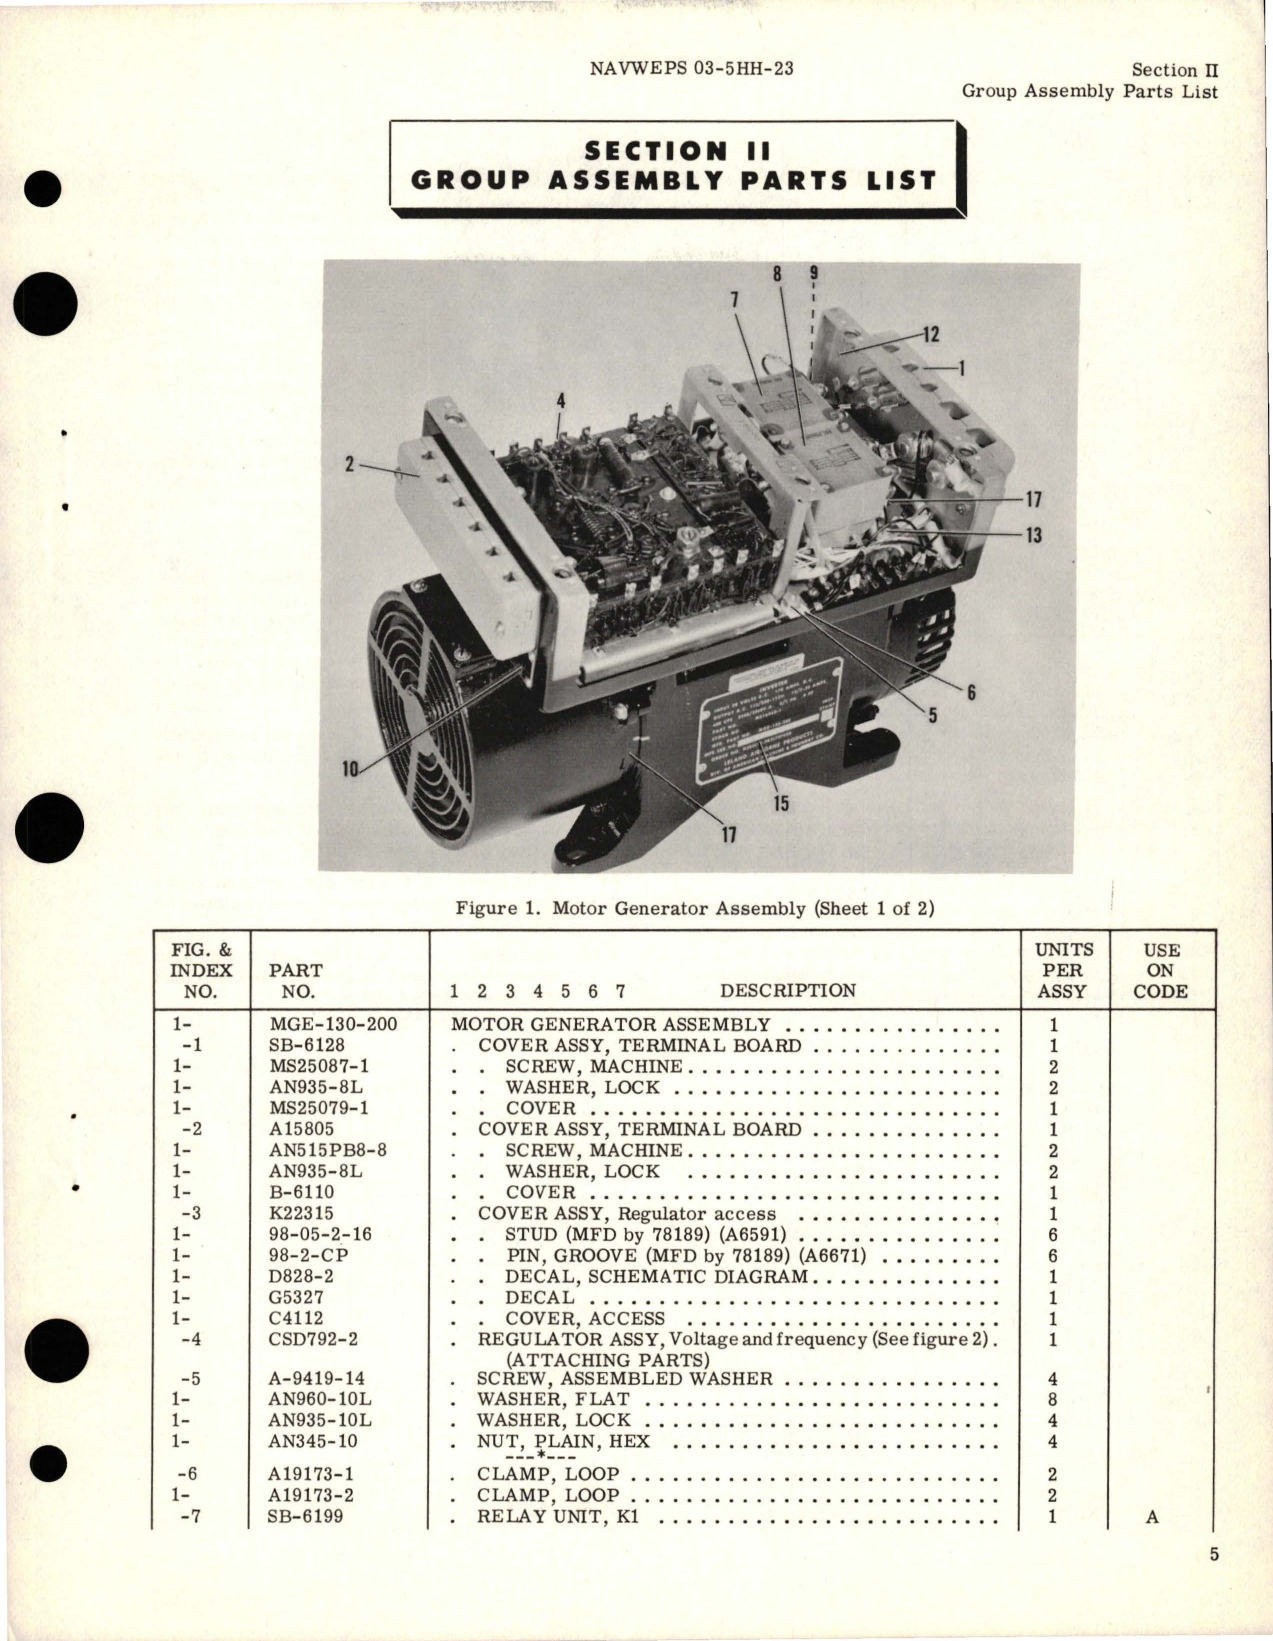 Sample page 7 from AirCorps Library document: Illustrated Parts Breakdown for Motor-Generator Assembly - Part MGE 130-200